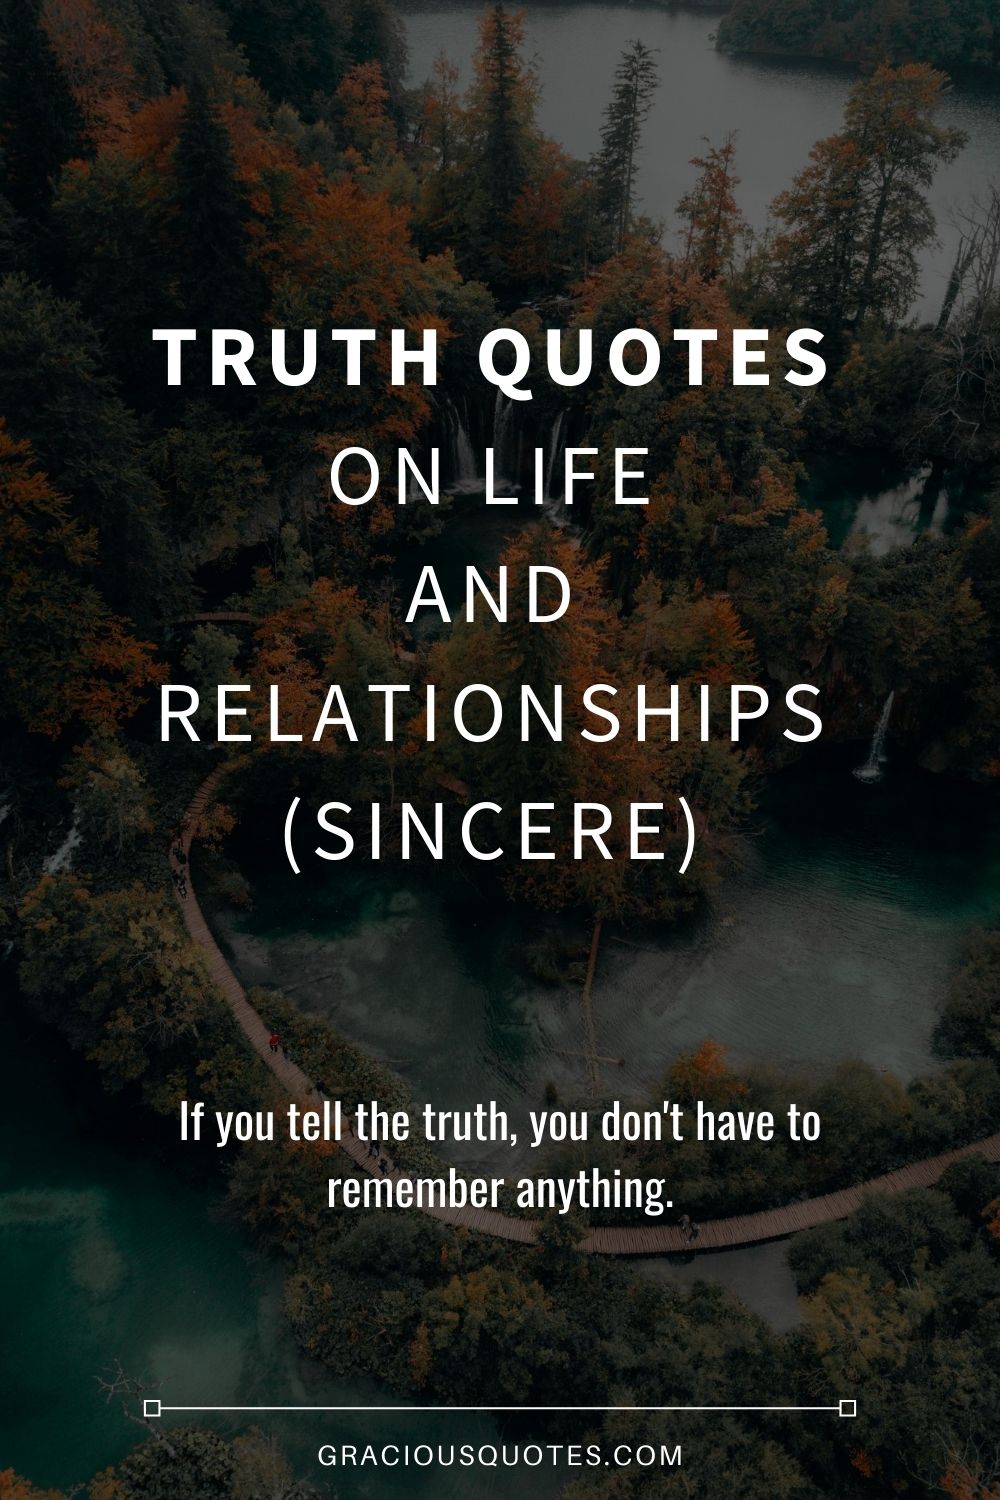 Truth Quotes on Life and Relationships (SINCERE) - Gracious Quotes